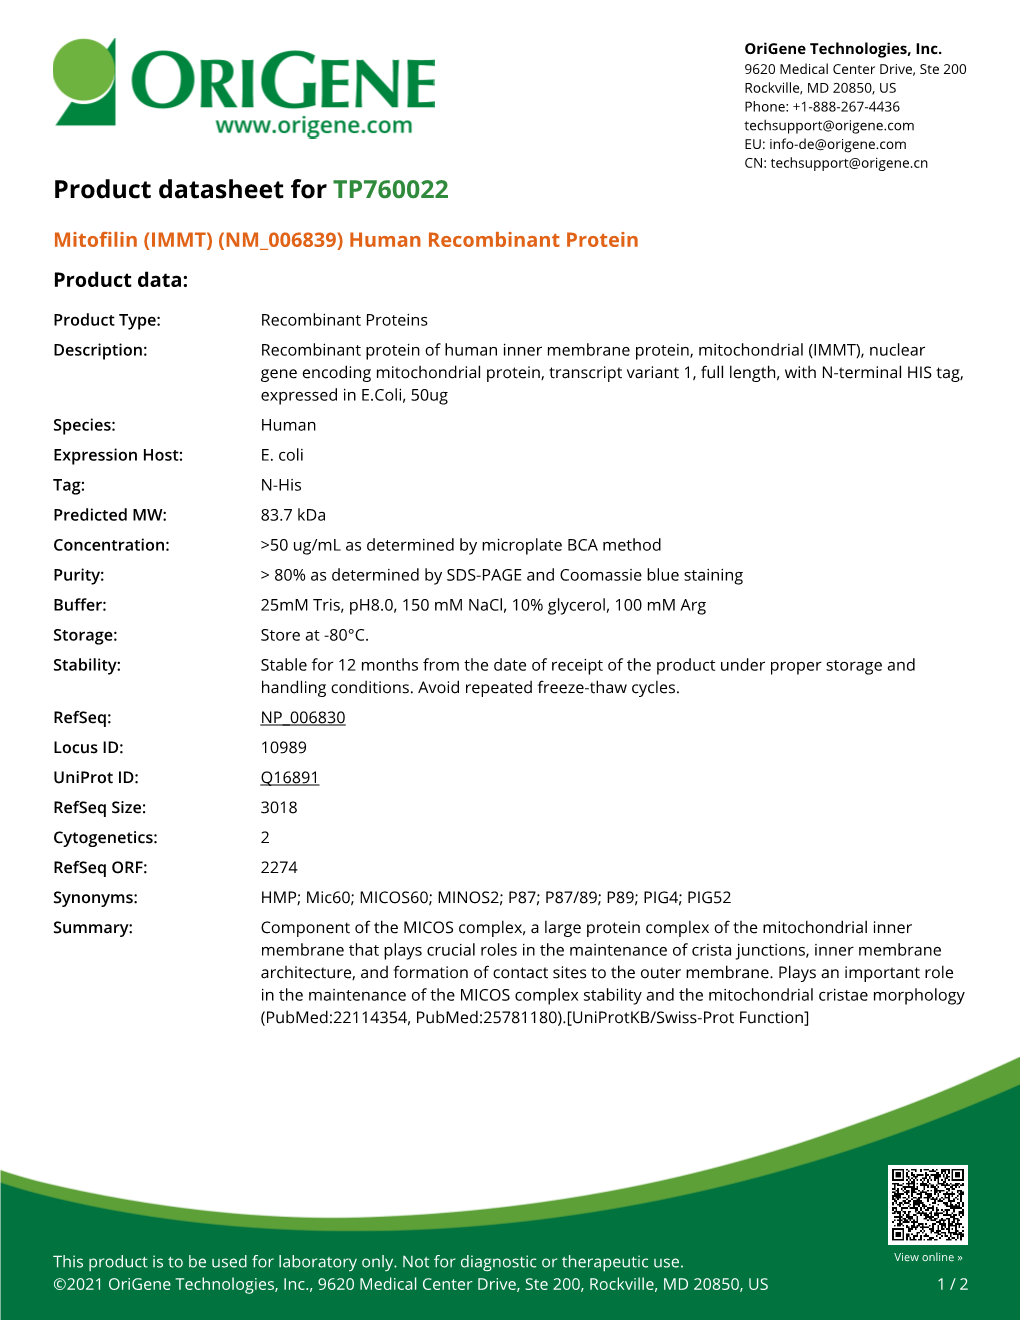 (IMMT) (NM 006839) Human Recombinant Protein Product Data